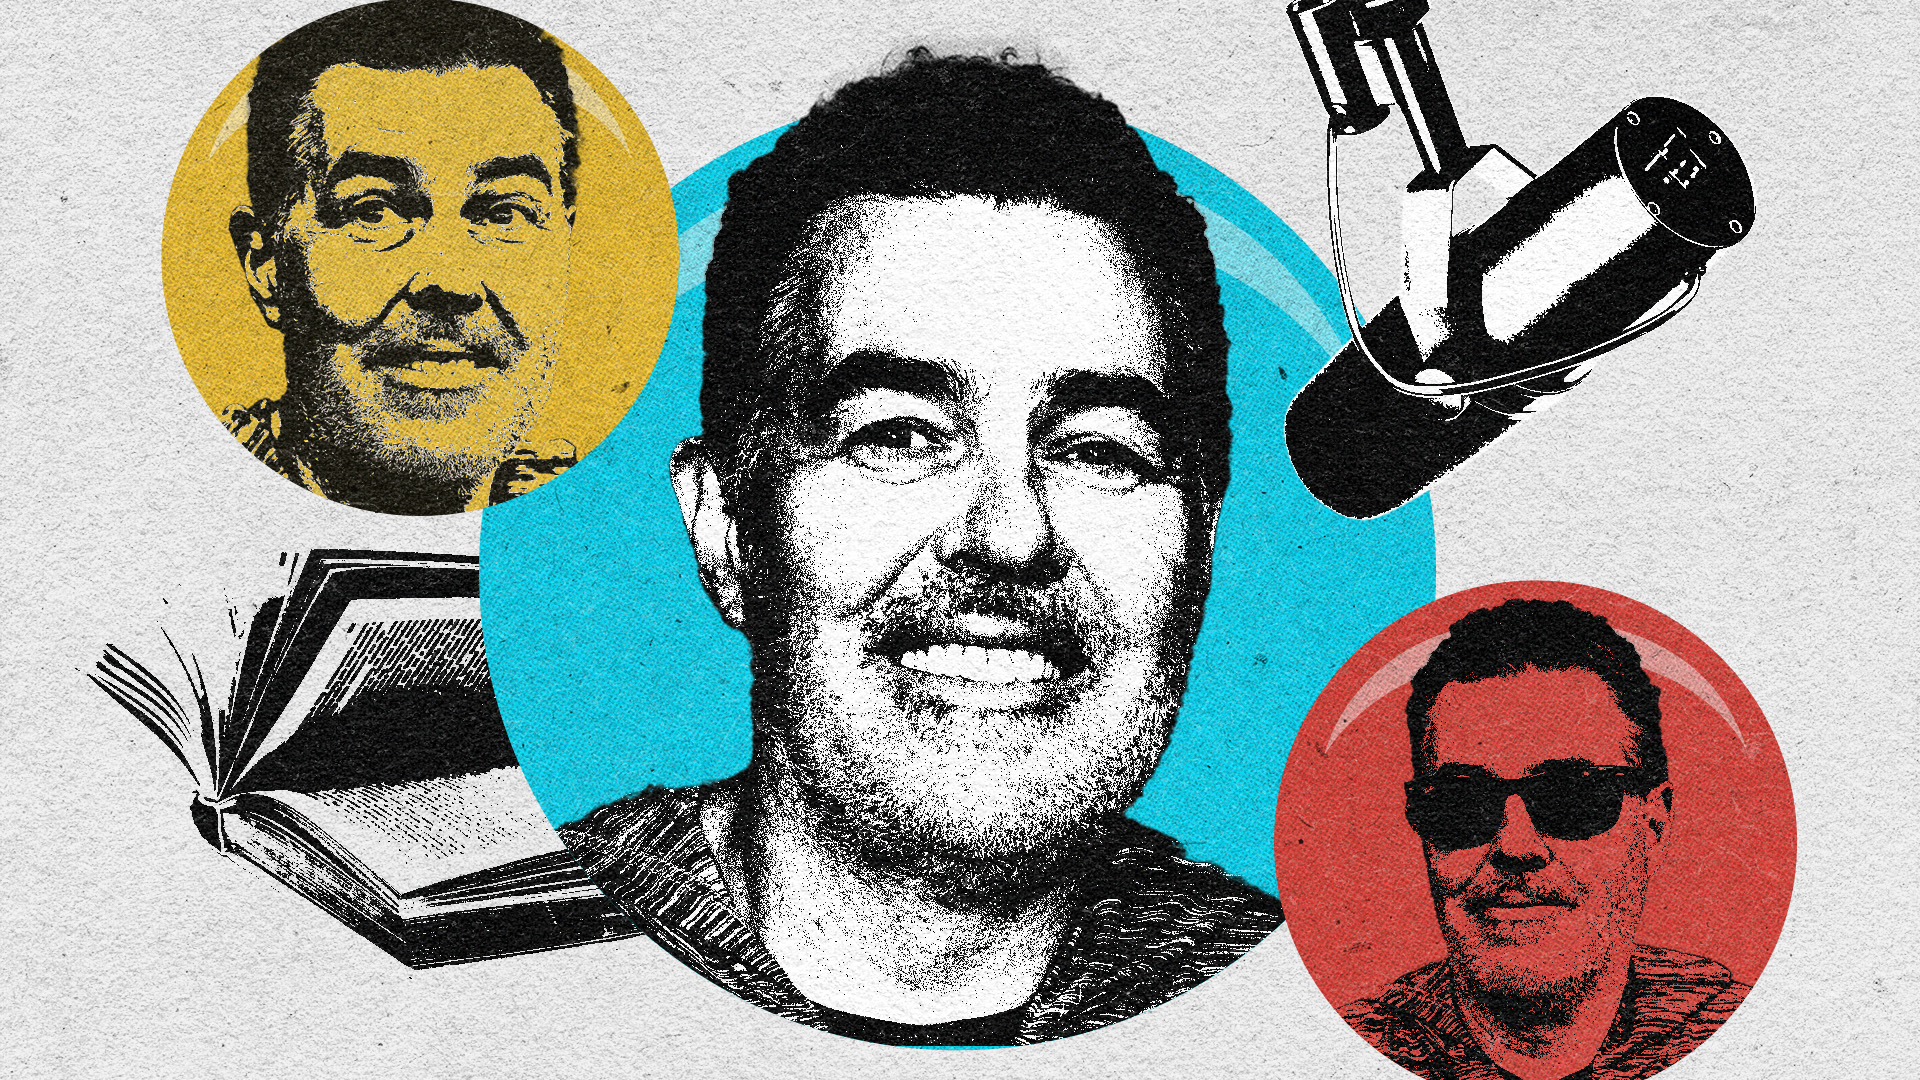 Release Your Own Stuff Push Back Adam Carolla And The New Underground Resistance